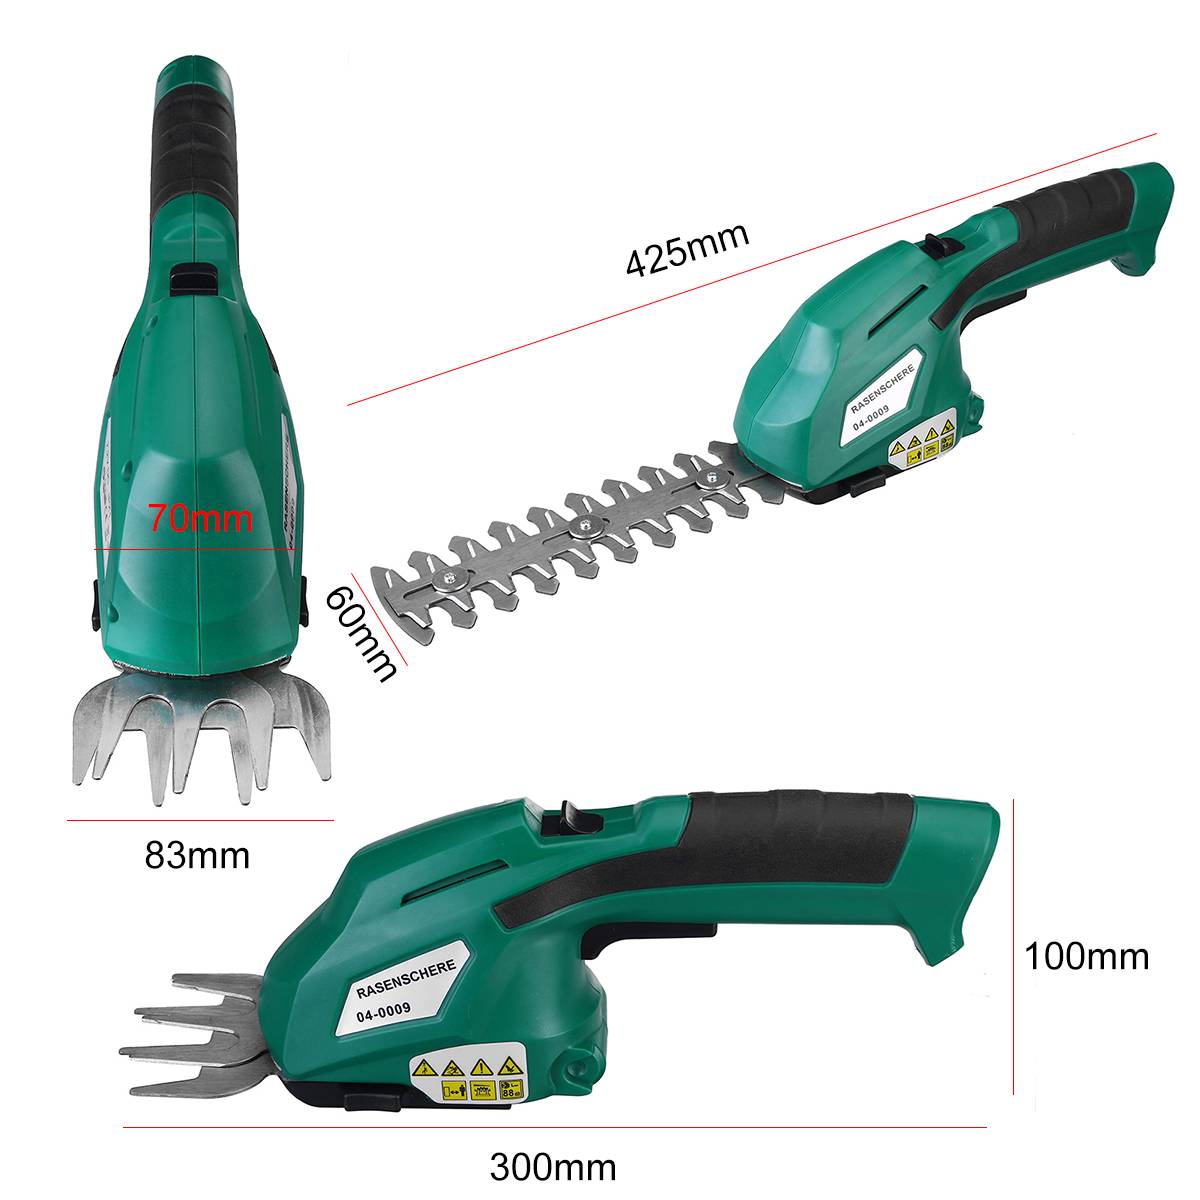 2-IN-1 Cordless Electric Trimmer Grass Shear 7.2V Rechargeable Hedge Grass Trimmer Shrub Cutter Garden Tools Power Tools